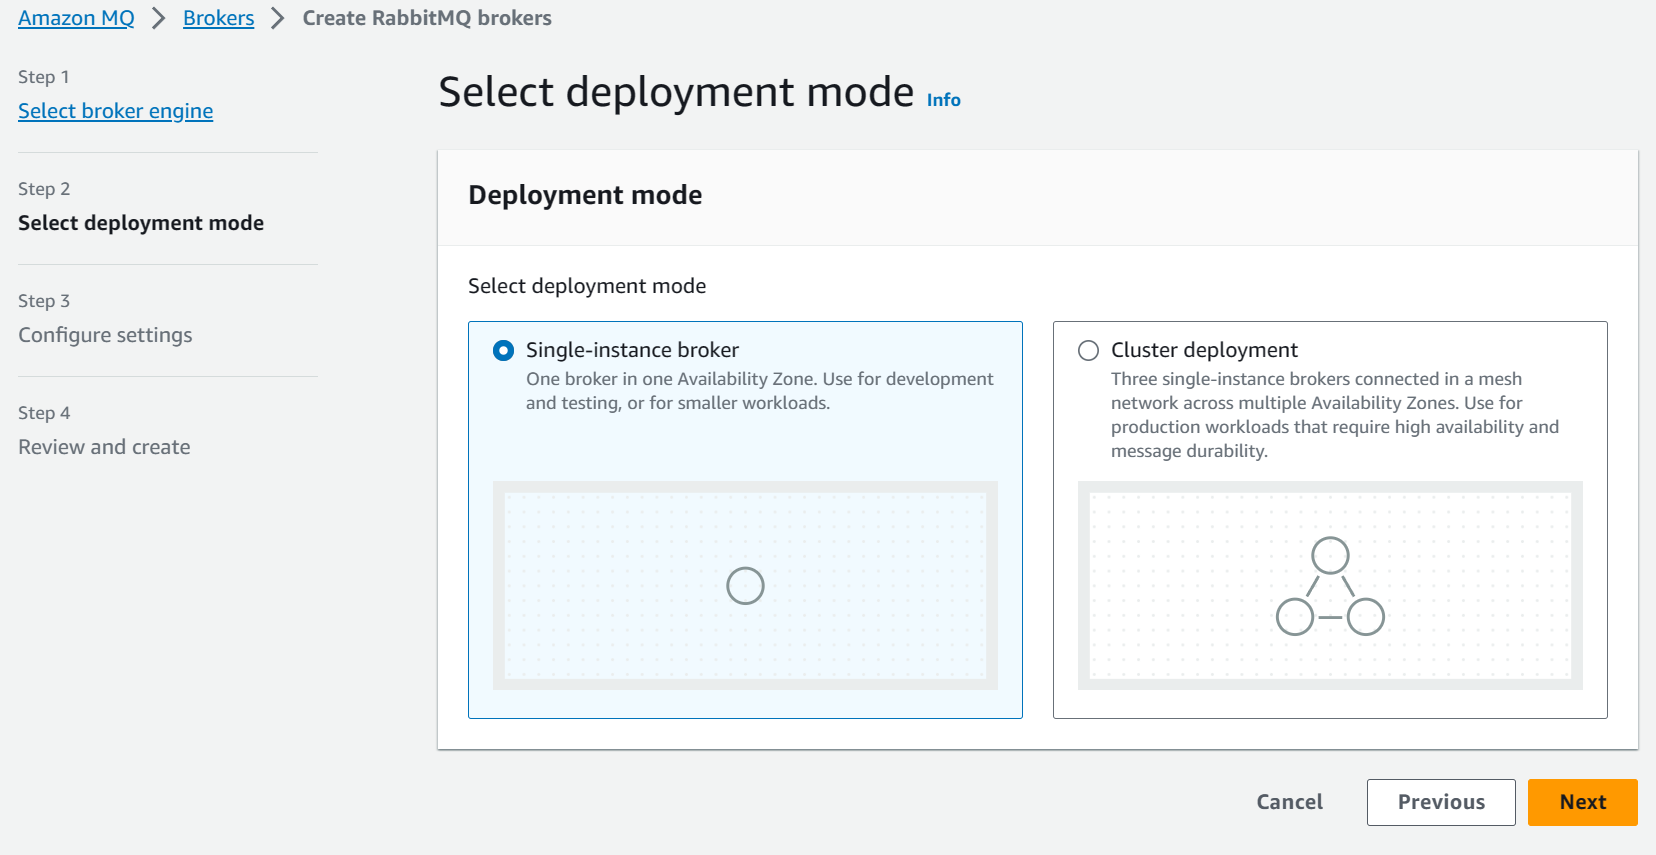 Choose the deployment mode for Amazon MQ Rabbit broker instance - choose between single instance and cluster.